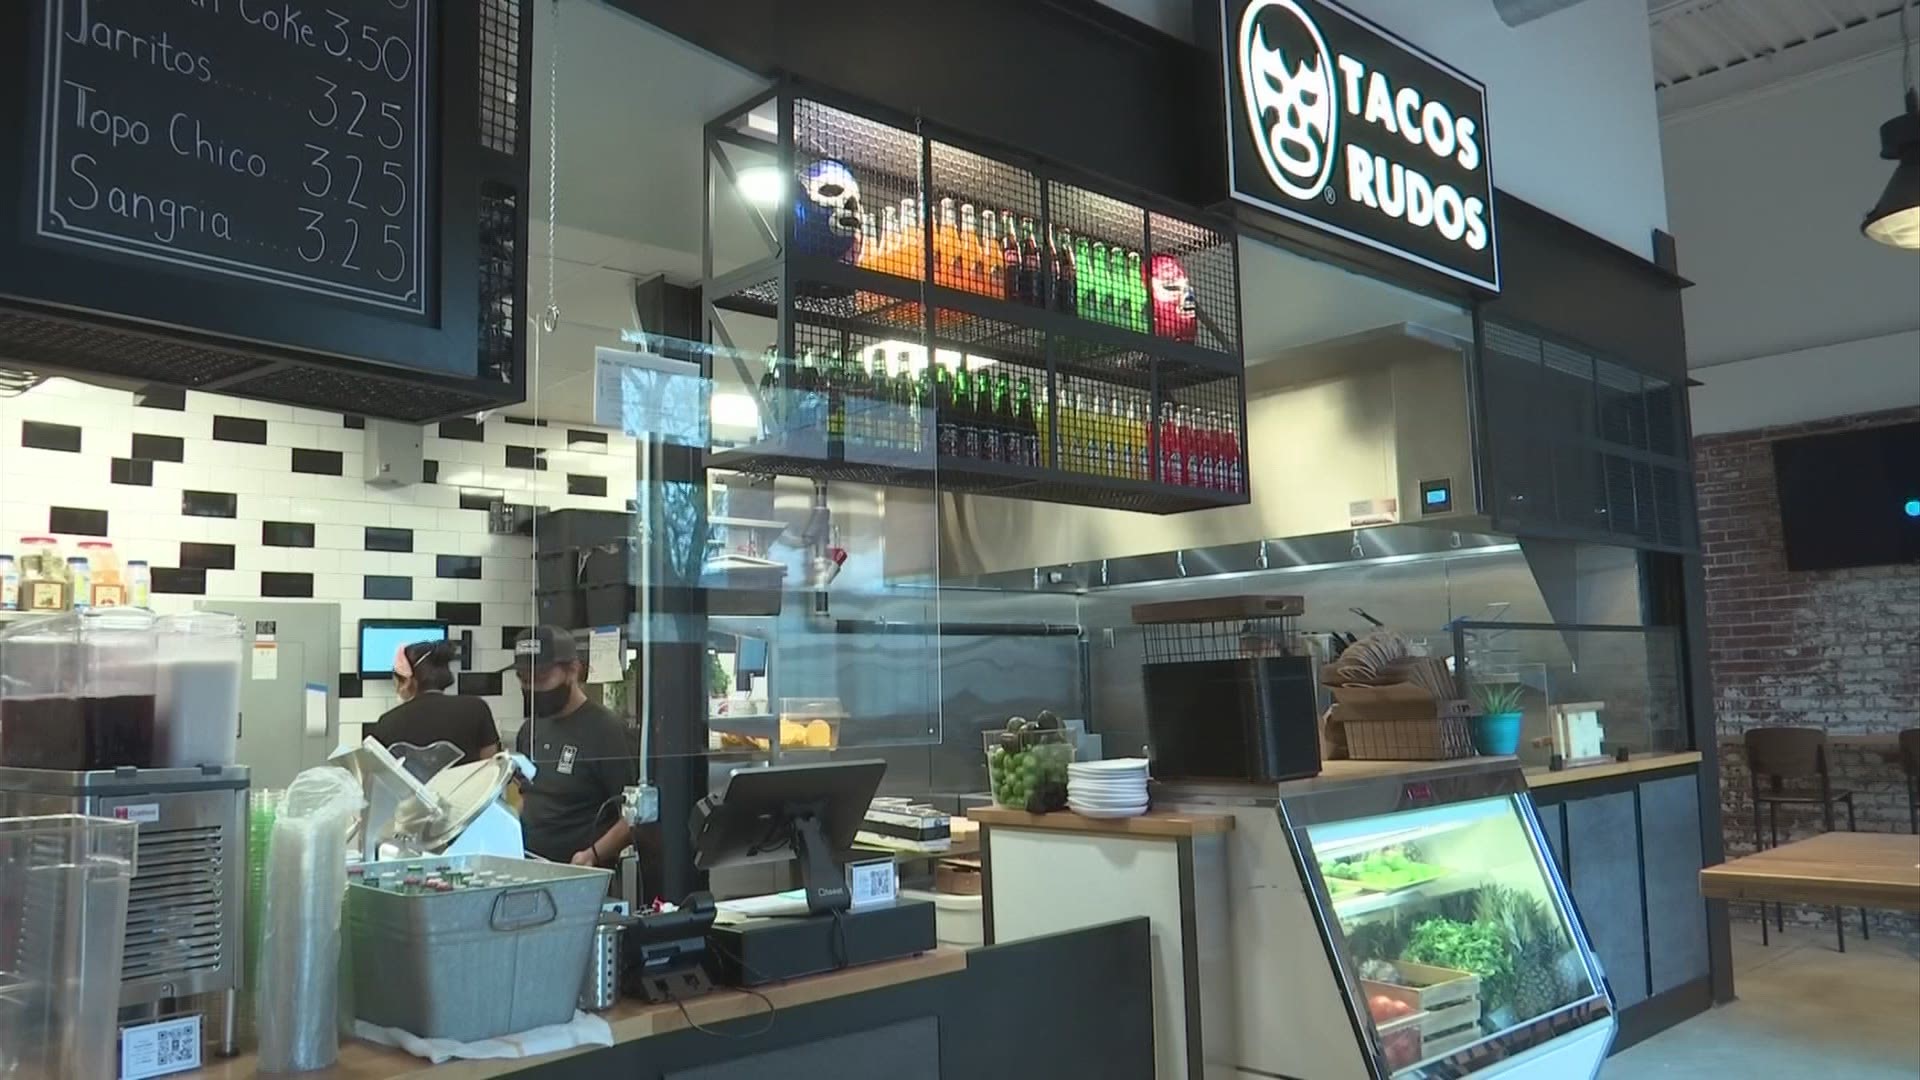 Tacos Rudos is a brand-new restaurant inspired by authentic, Mexican cuisine.